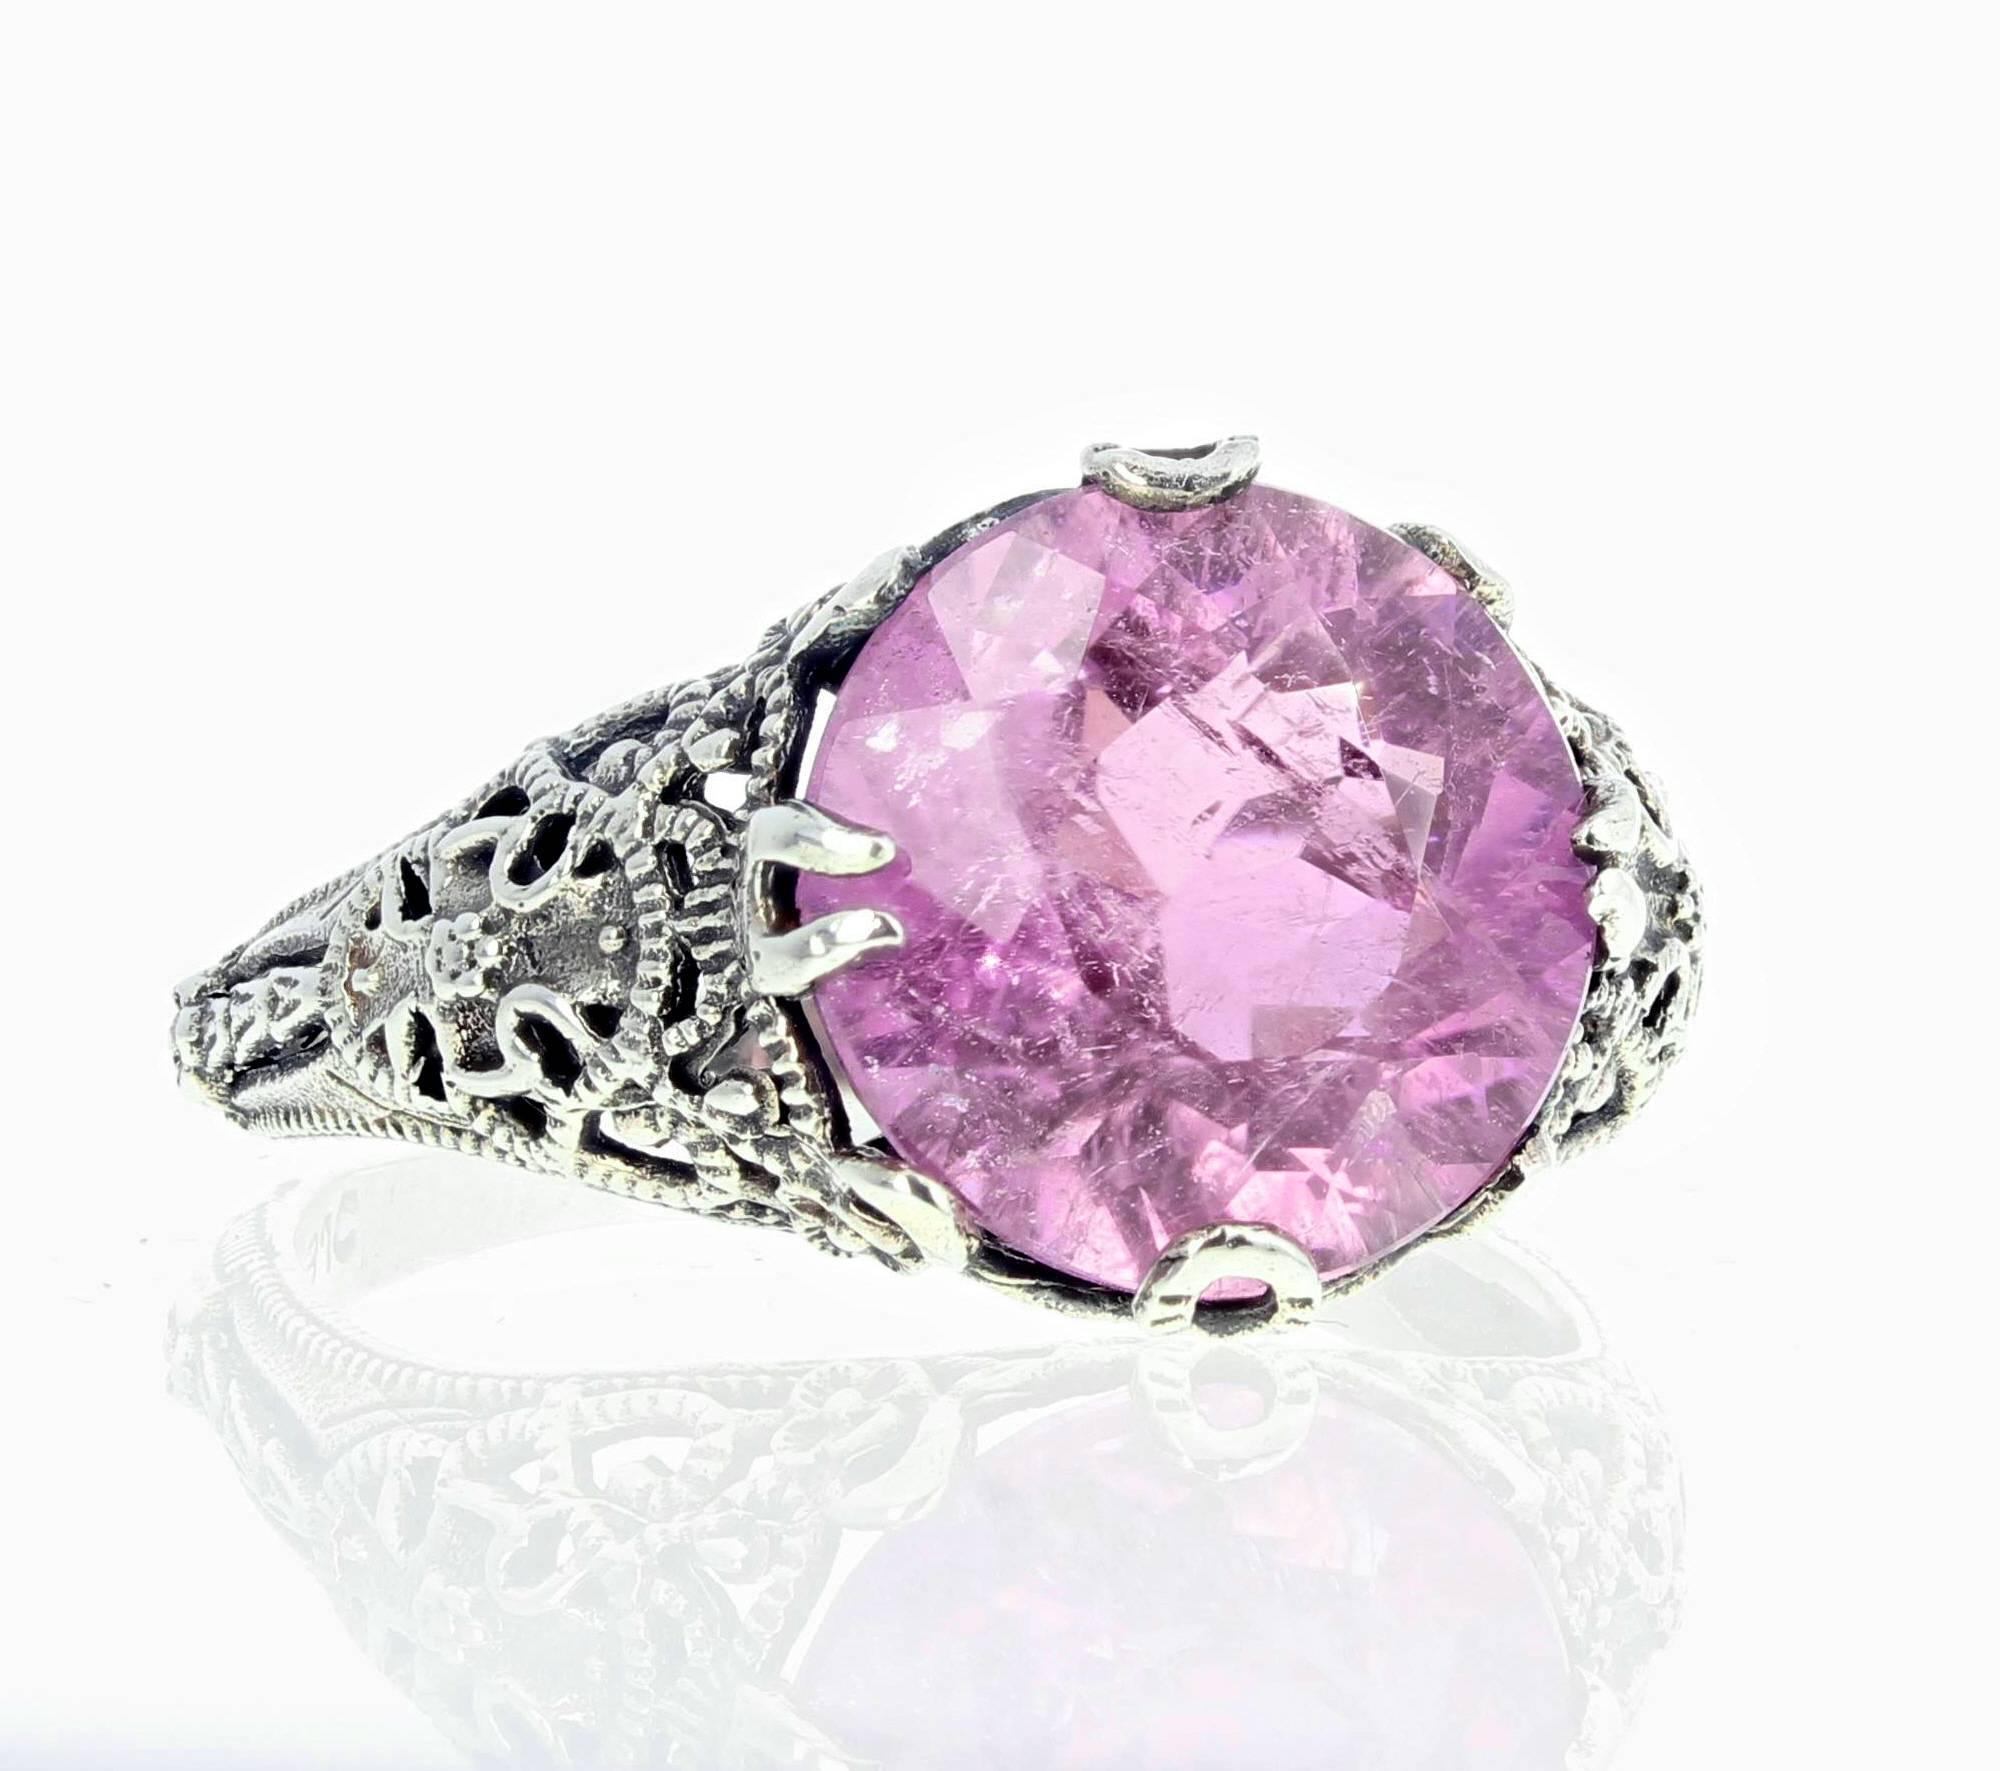 Pinky brilliant round 6.5 carat Kunzite (12 mm) set in a sterling silver ring size 9 (sizable FOR FREE).  Spectacular optical effect in the Kuzite exhibits pink reflections and fire highlights in pinky colors.   